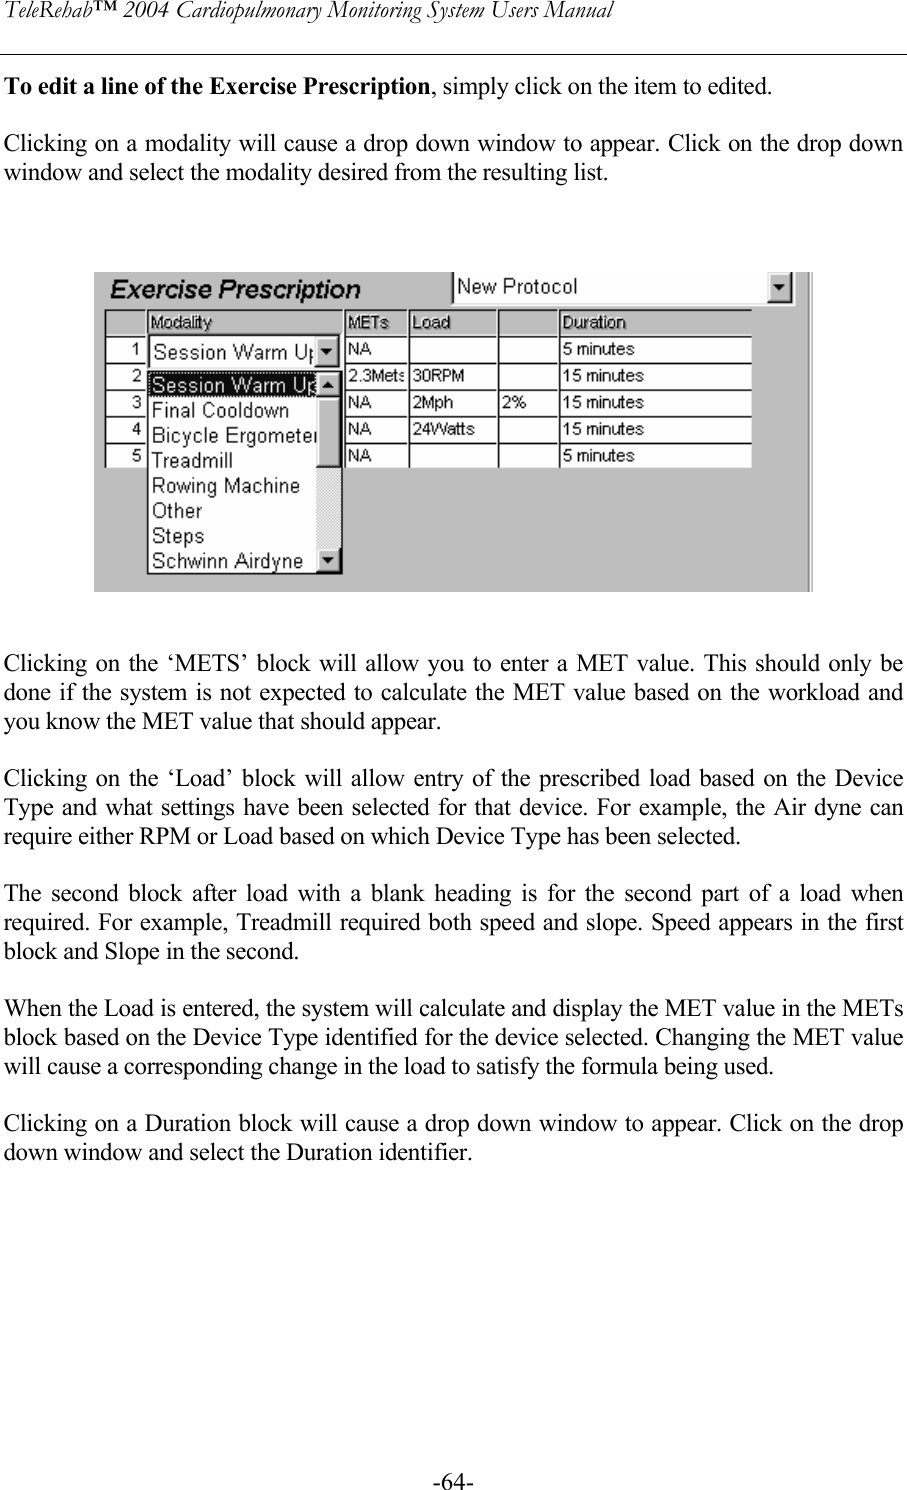 TeleRehab™ 2004 Cardiopulmonary Monitoring System Users Manual    -64-To edit a line of the Exercise Prescription, simply click on the item to edited.   Clicking on a modality will cause a drop down window to appear. Click on the drop down window and select the modality desired from the resulting list.       Clicking on the ‘METS’ block will allow you to enter a MET value. This should only be done if the system is not expected to calculate the MET value based on the workload and you know the MET value that should appear.  Clicking on the ‘Load’ block will allow entry of the prescribed load based on the Device Type and what settings have been selected for that device. For example, the Air dyne can require either RPM or Load based on which Device Type has been selected.  The second block after load with a blank heading is for the second part of a load when required. For example, Treadmill required both speed and slope. Speed appears in the first block and Slope in the second.  When the Load is entered, the system will calculate and display the MET value in the METs block based on the Device Type identified for the device selected. Changing the MET value will cause a corresponding change in the load to satisfy the formula being used.  Clicking on a Duration block will cause a drop down window to appear. Click on the drop down window and select the Duration identifier.  